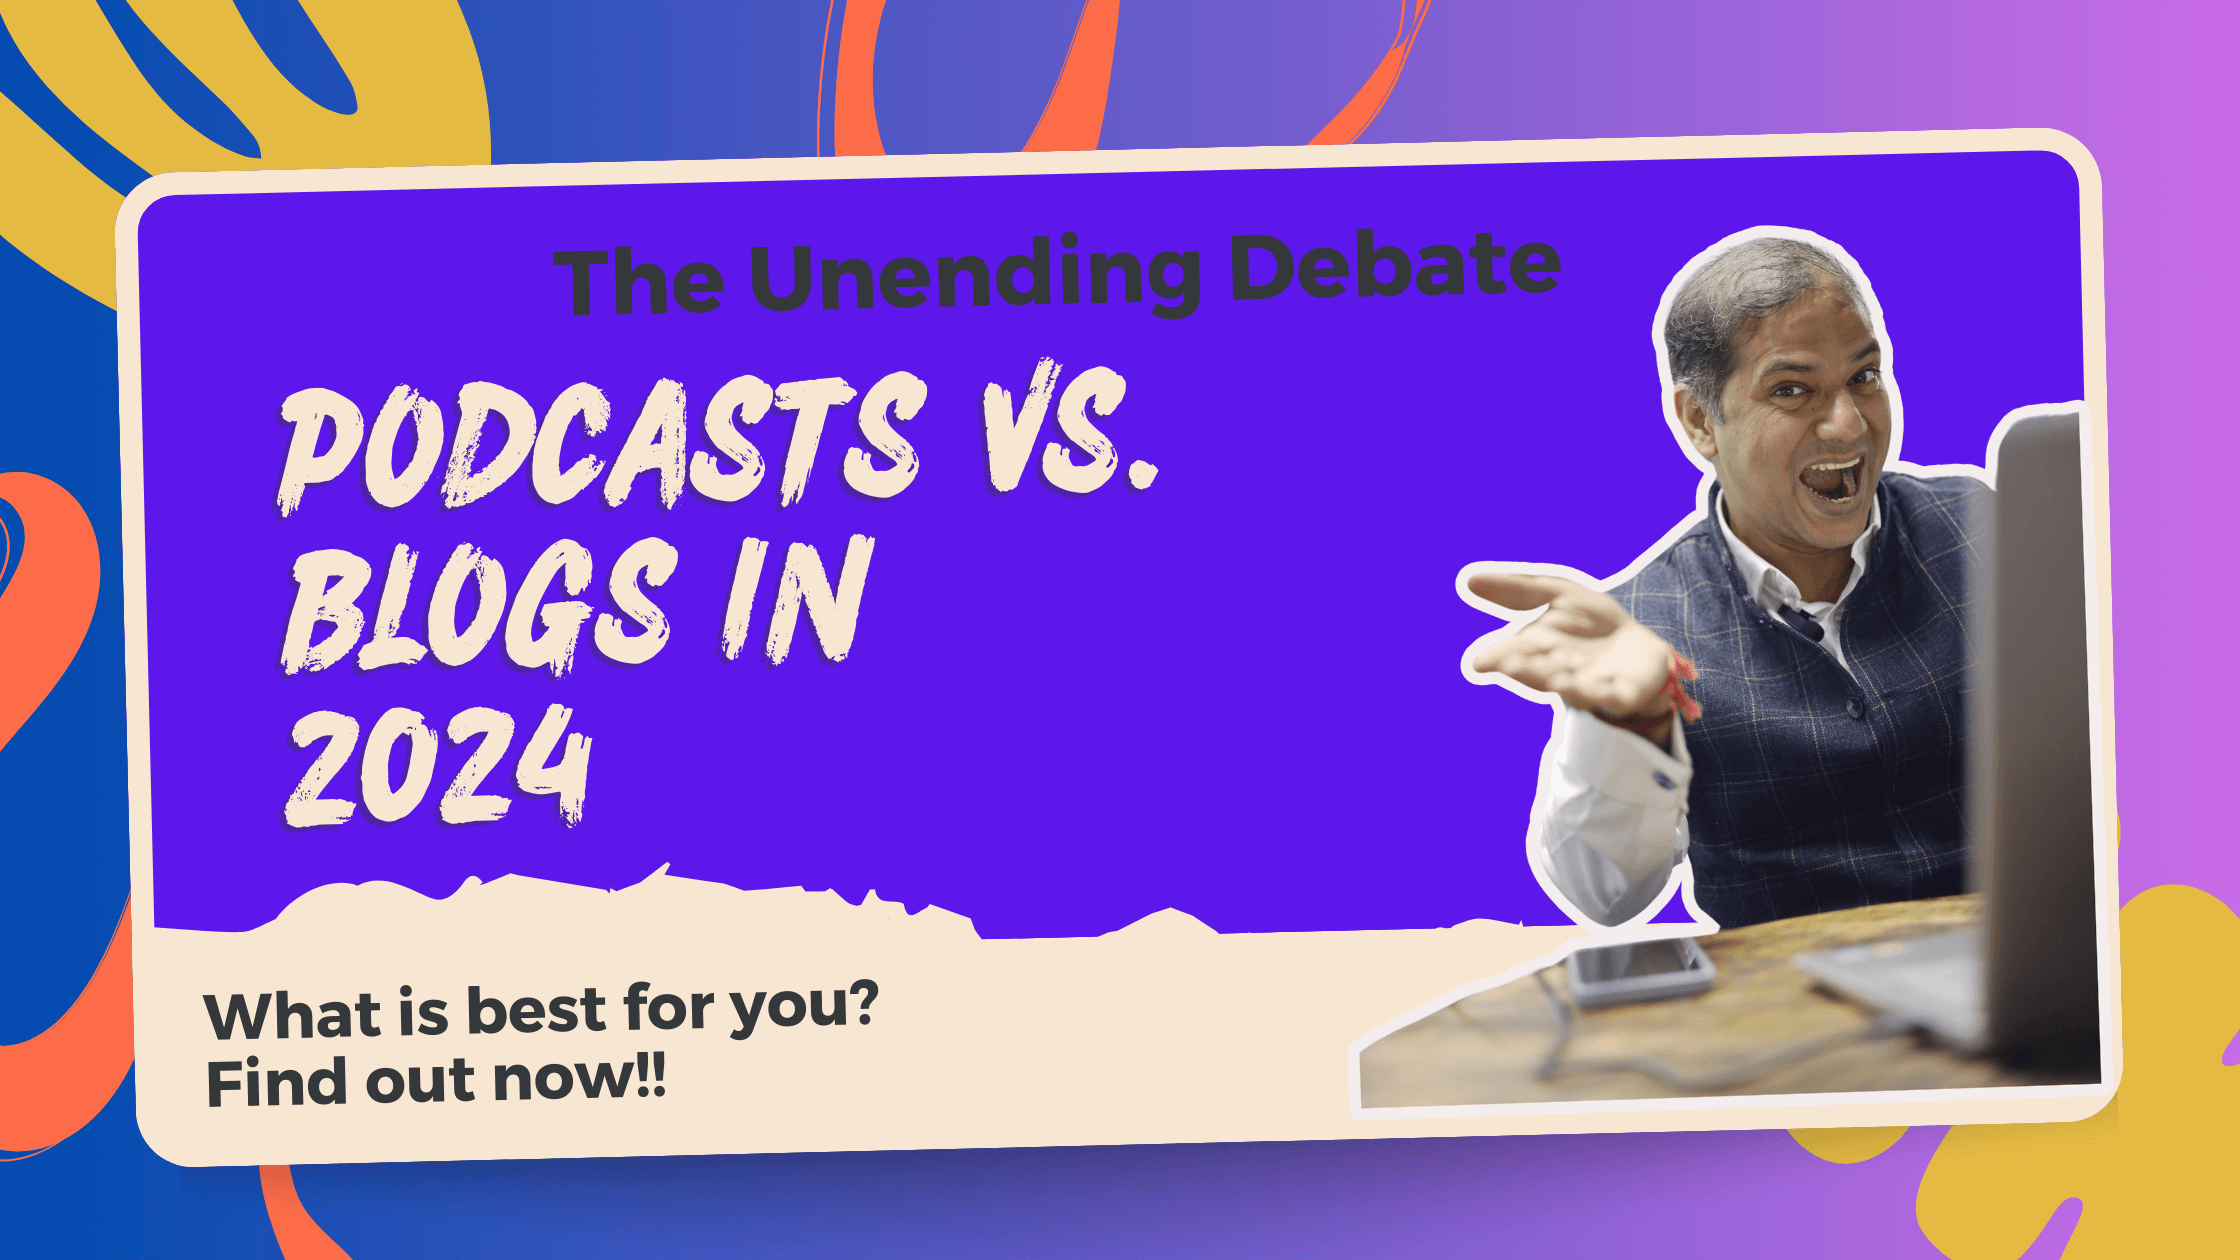 The Unending Debate: Podcasts vs. Blogs in 2024